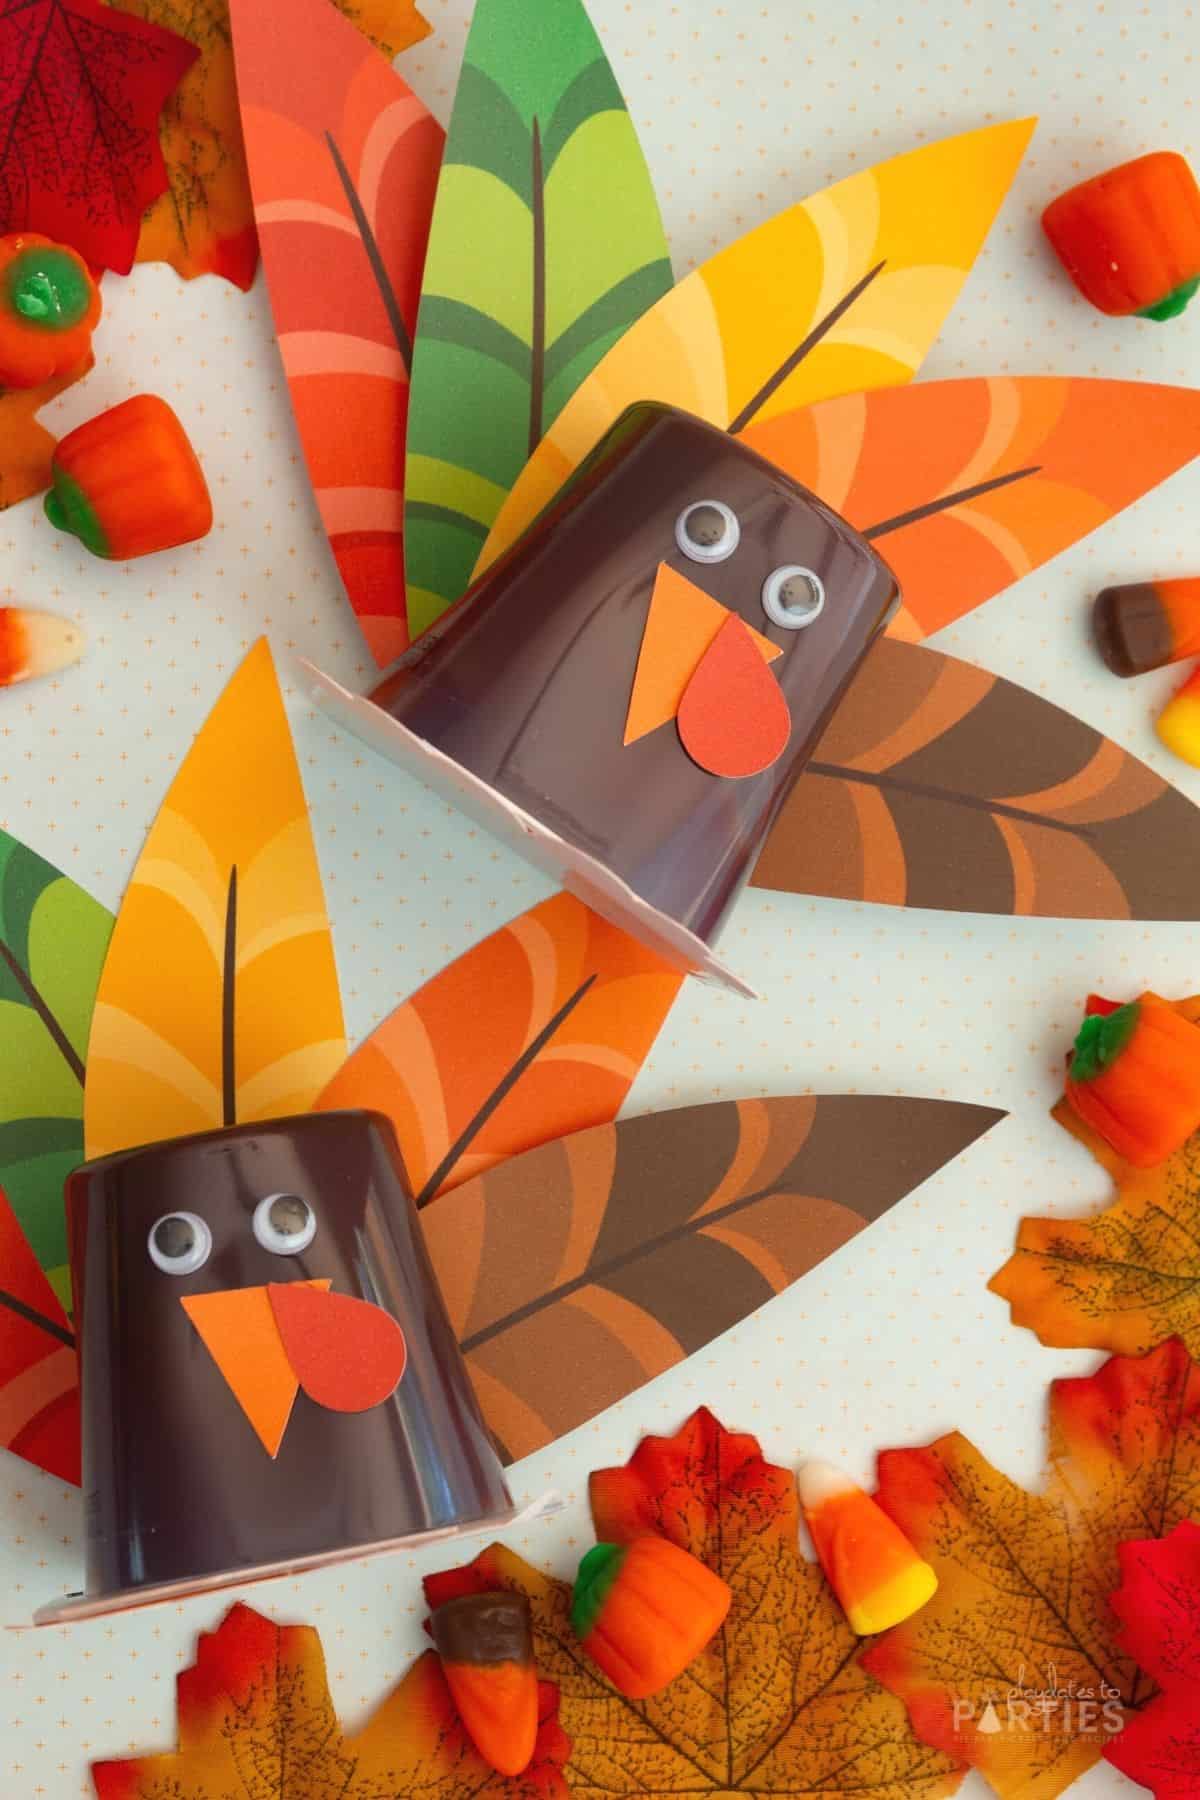 Two turkey pudding cups laying on a piece of blue paper with orange dots, surrounded by leaves and candy corn.